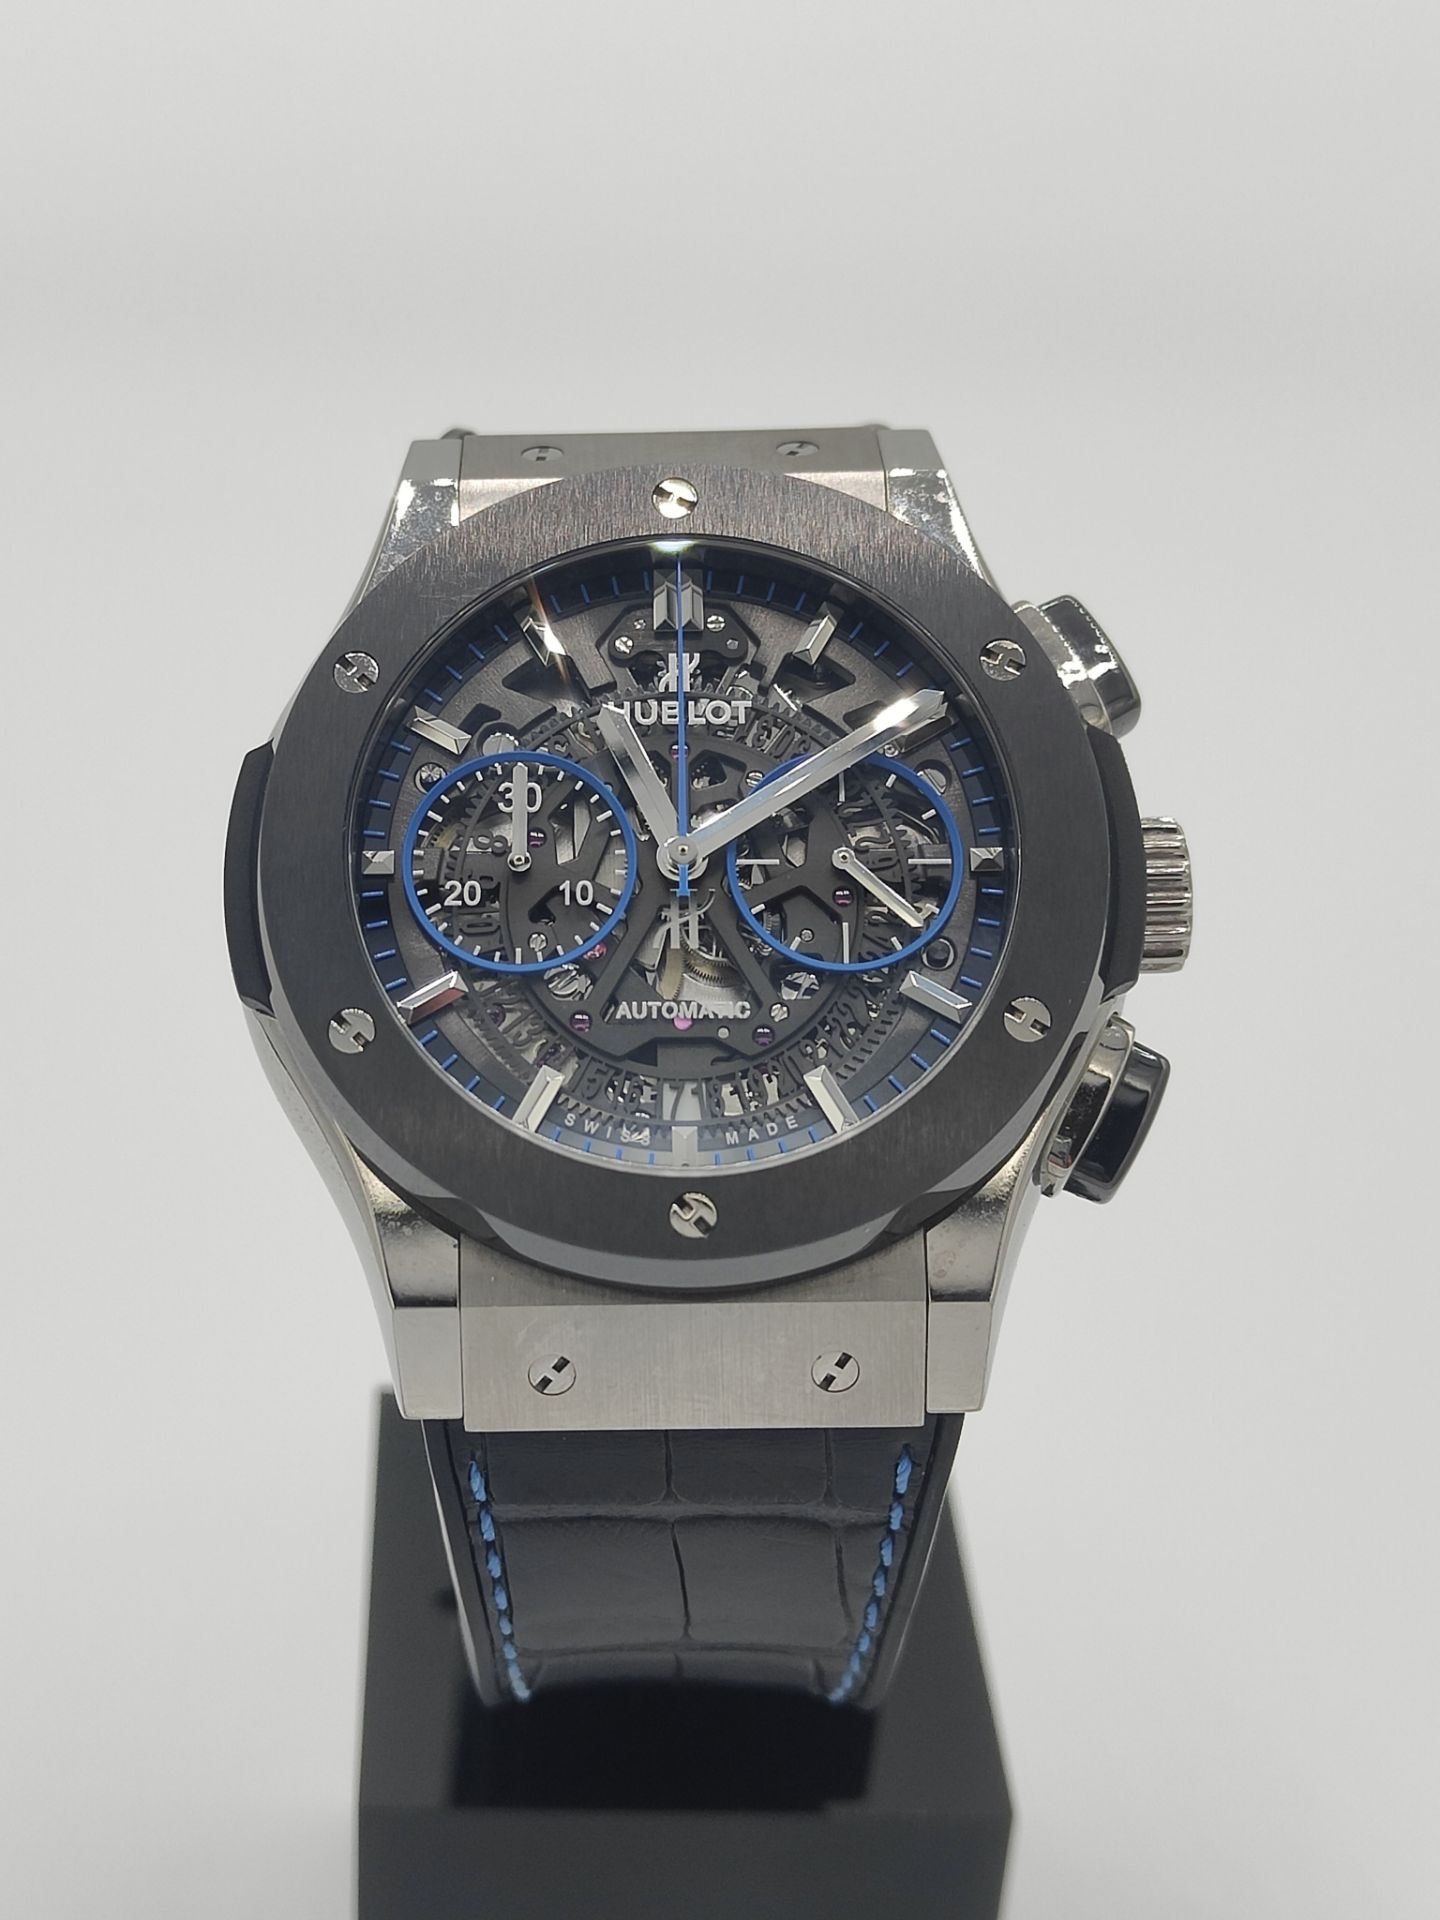 Hublot Classic Fusion Special Edition Watch - Image 4 of 11